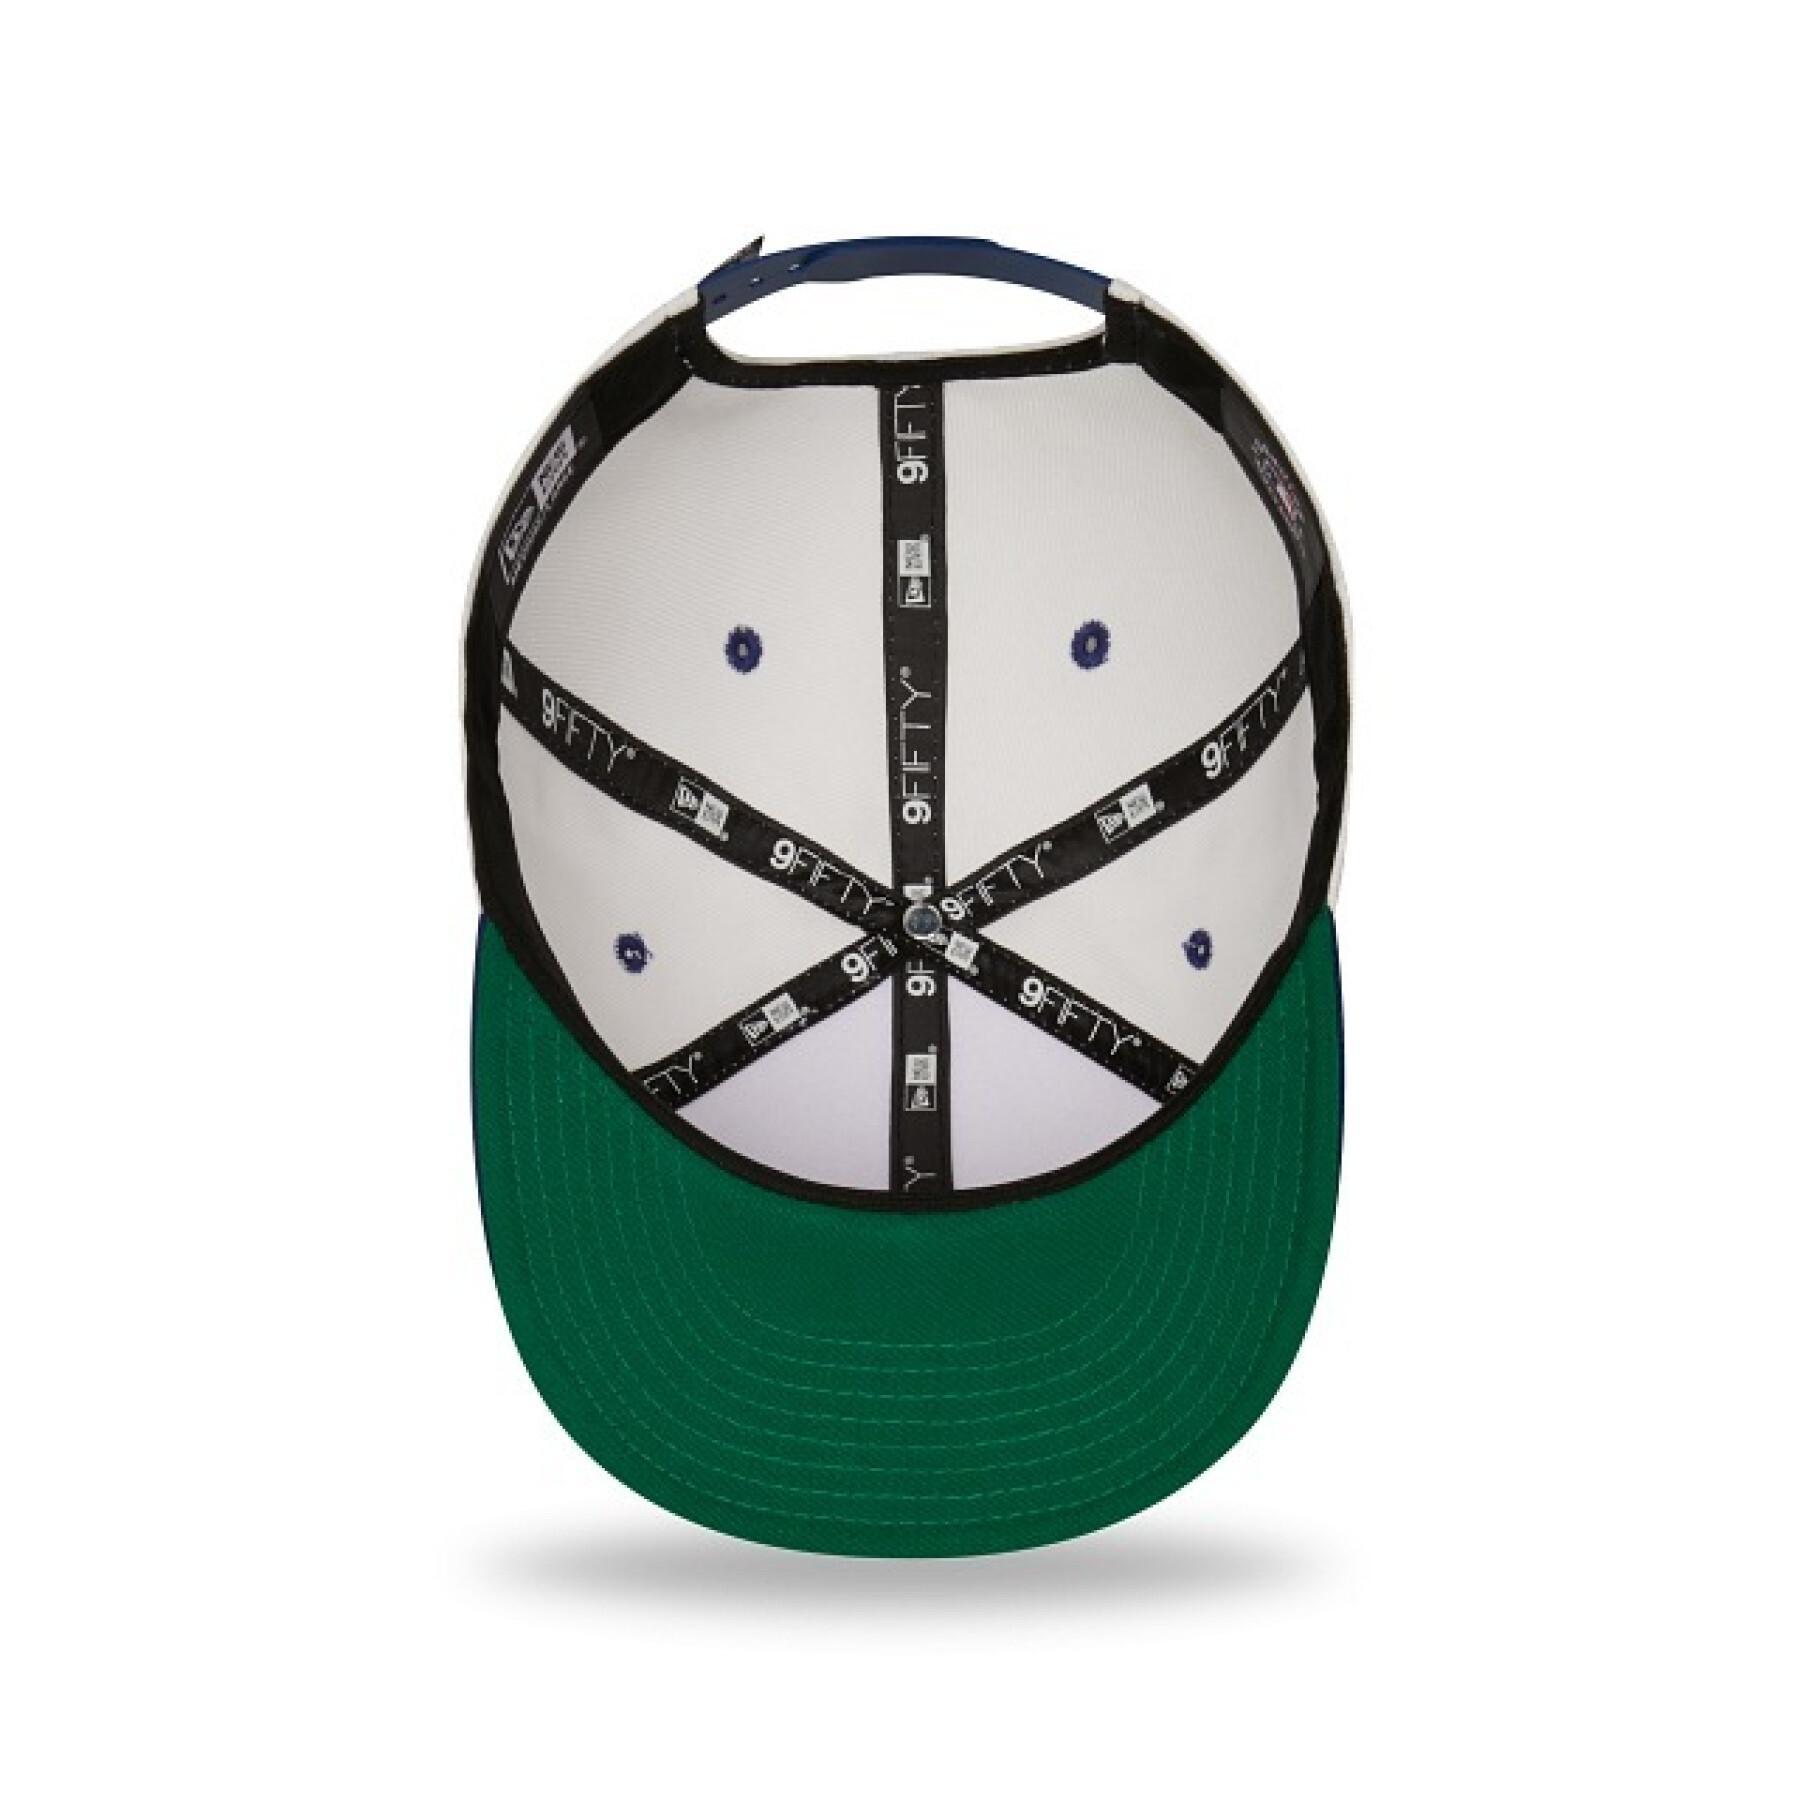 Gorra 9fifty Los Angeles Dodgers